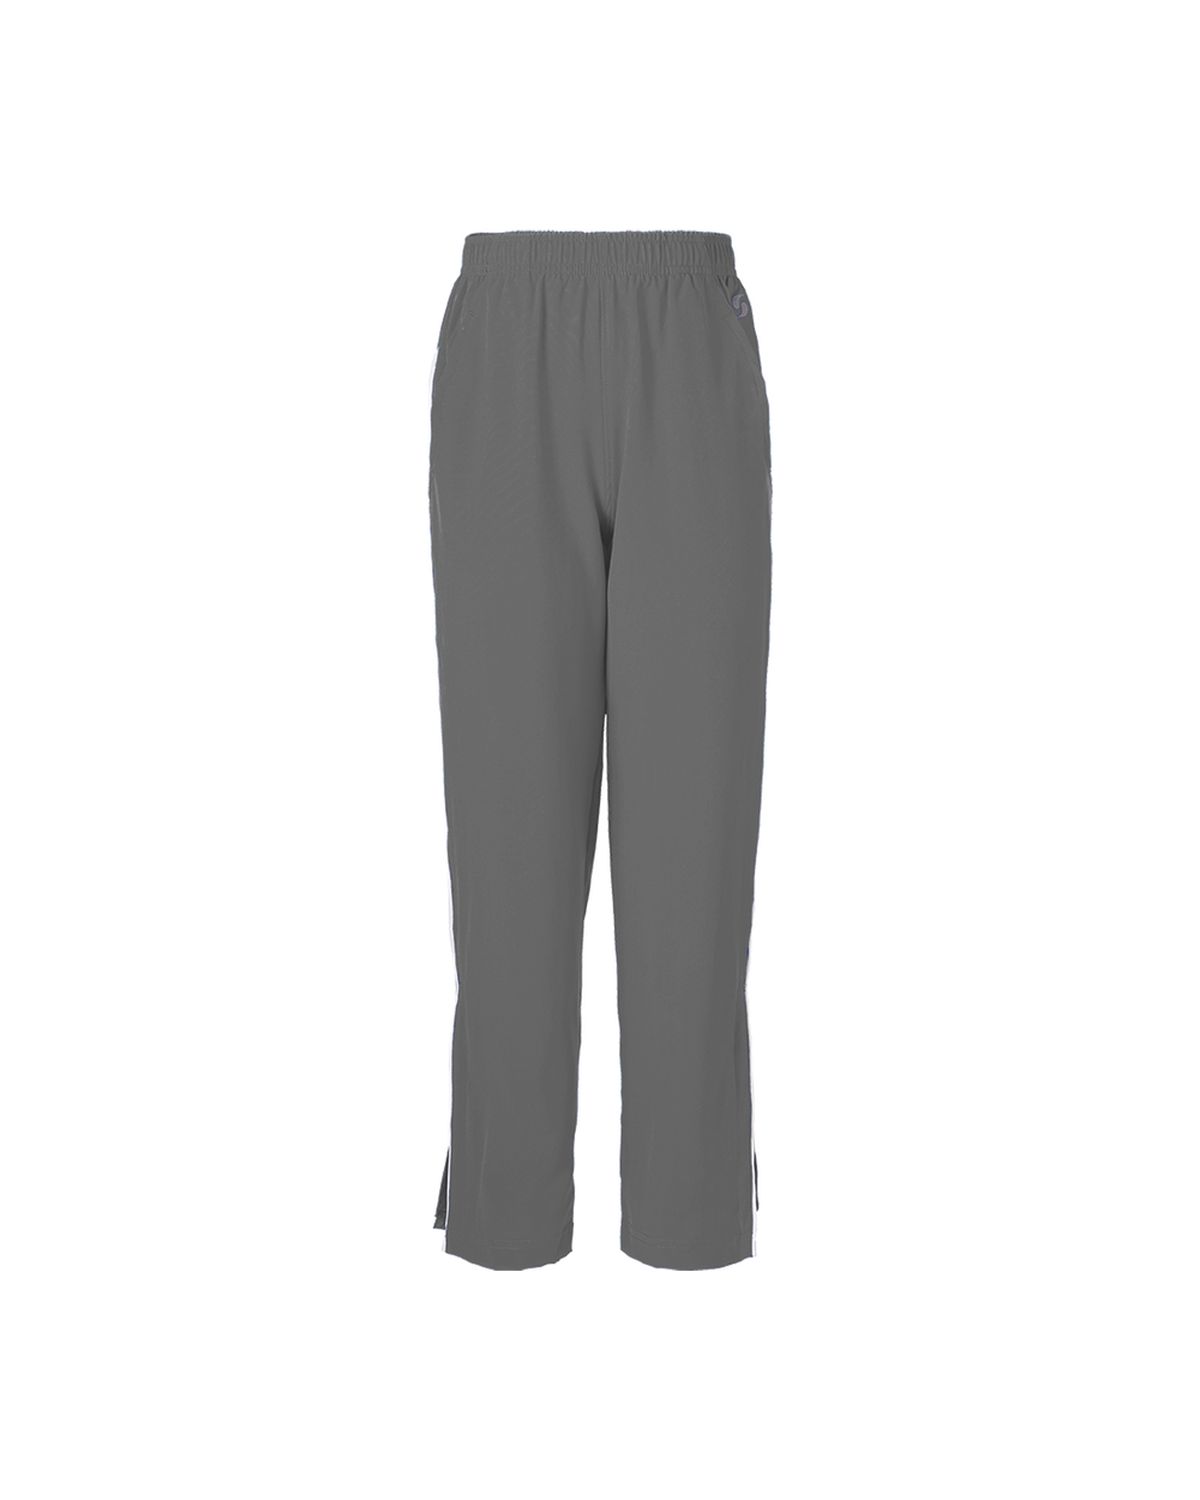 'Soffe 1025Y Youth Game Time Warm Up Pant'